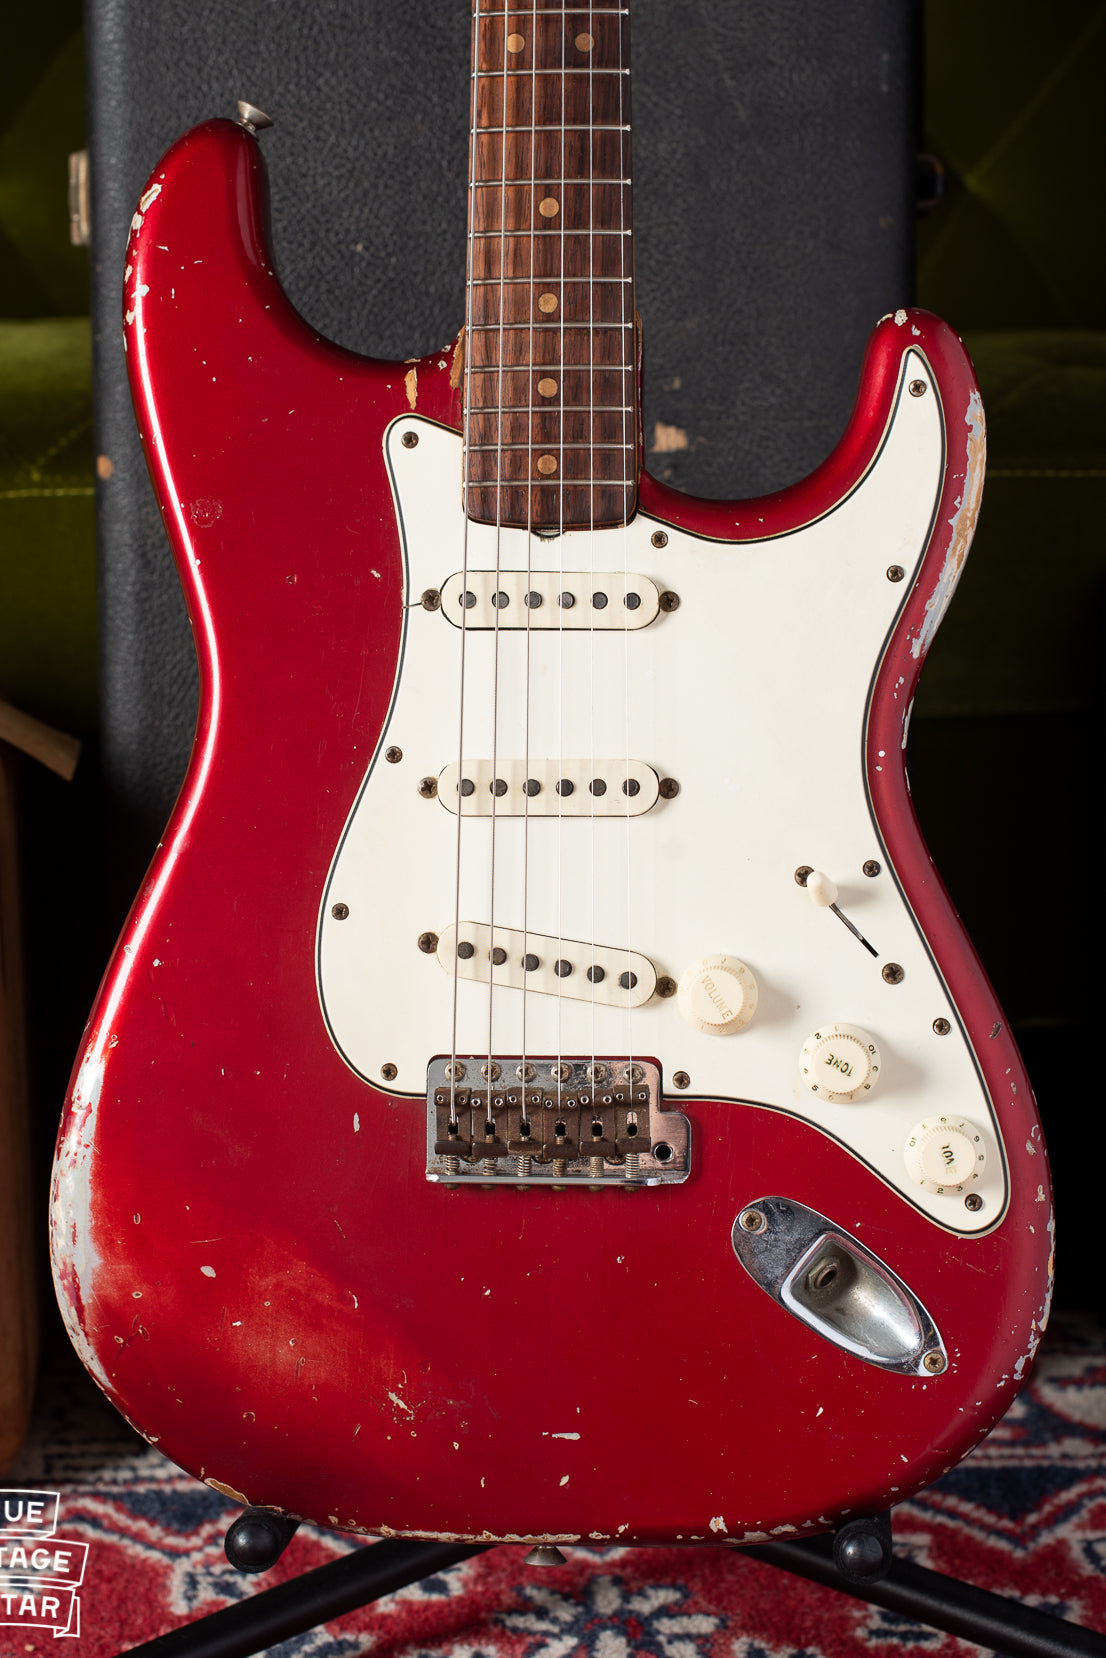 Fender Stratocaster 1964 Candy Apple Red finish